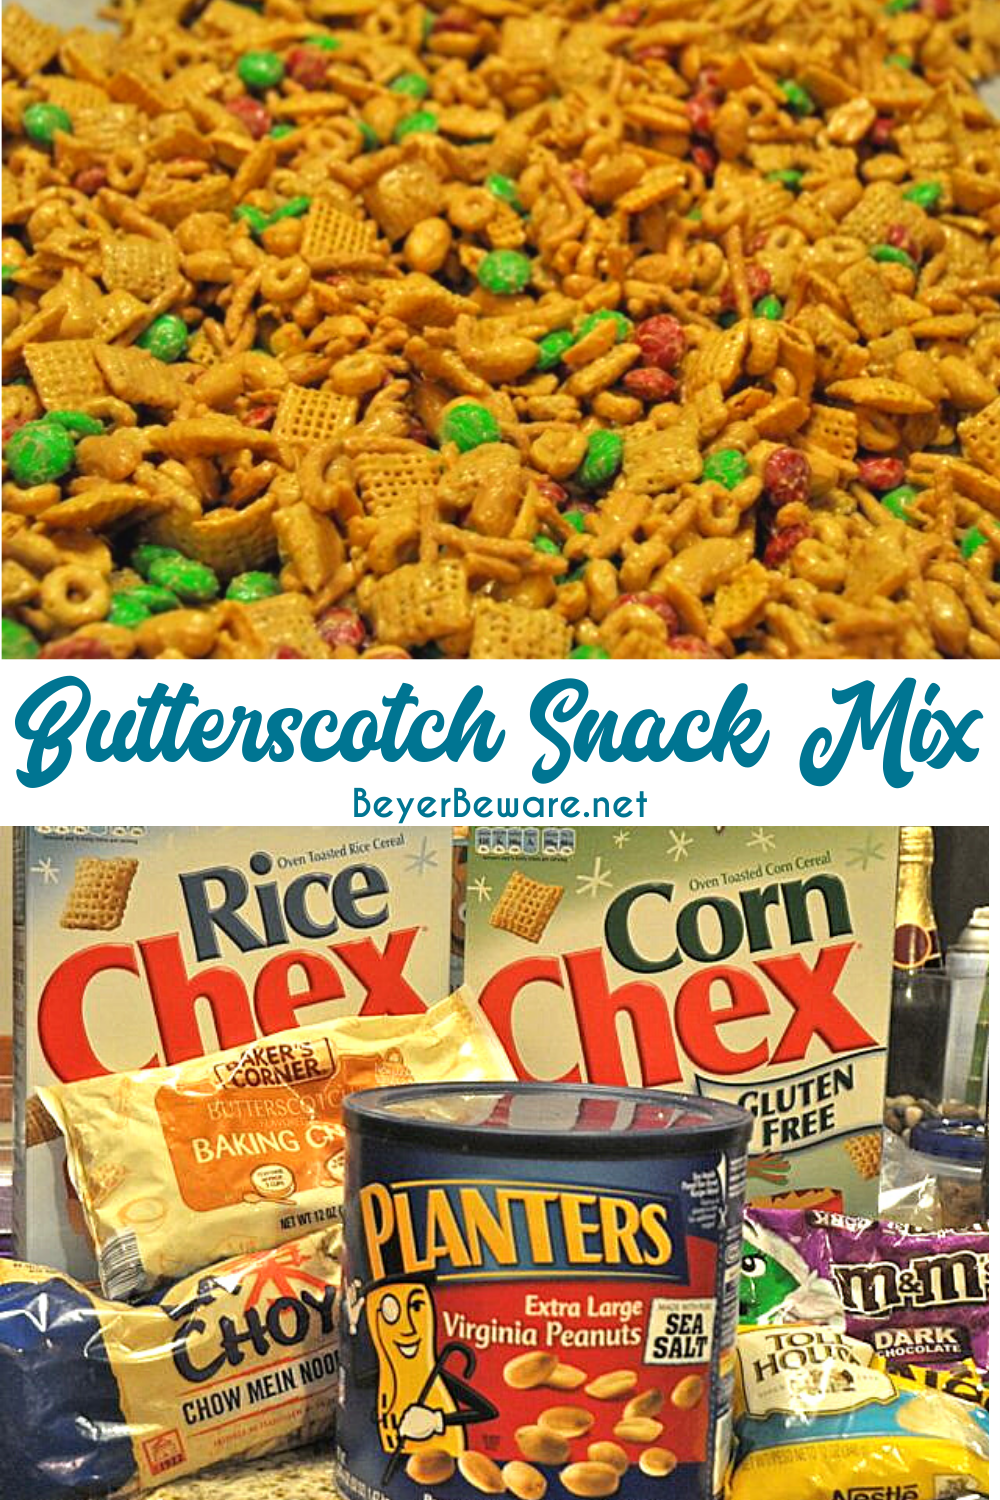 Butterscotch Snack Mix is the candy coated chex mix Chex and Cheerio cereal, peanuts, and candy covered in butterscotch and peanut butter.